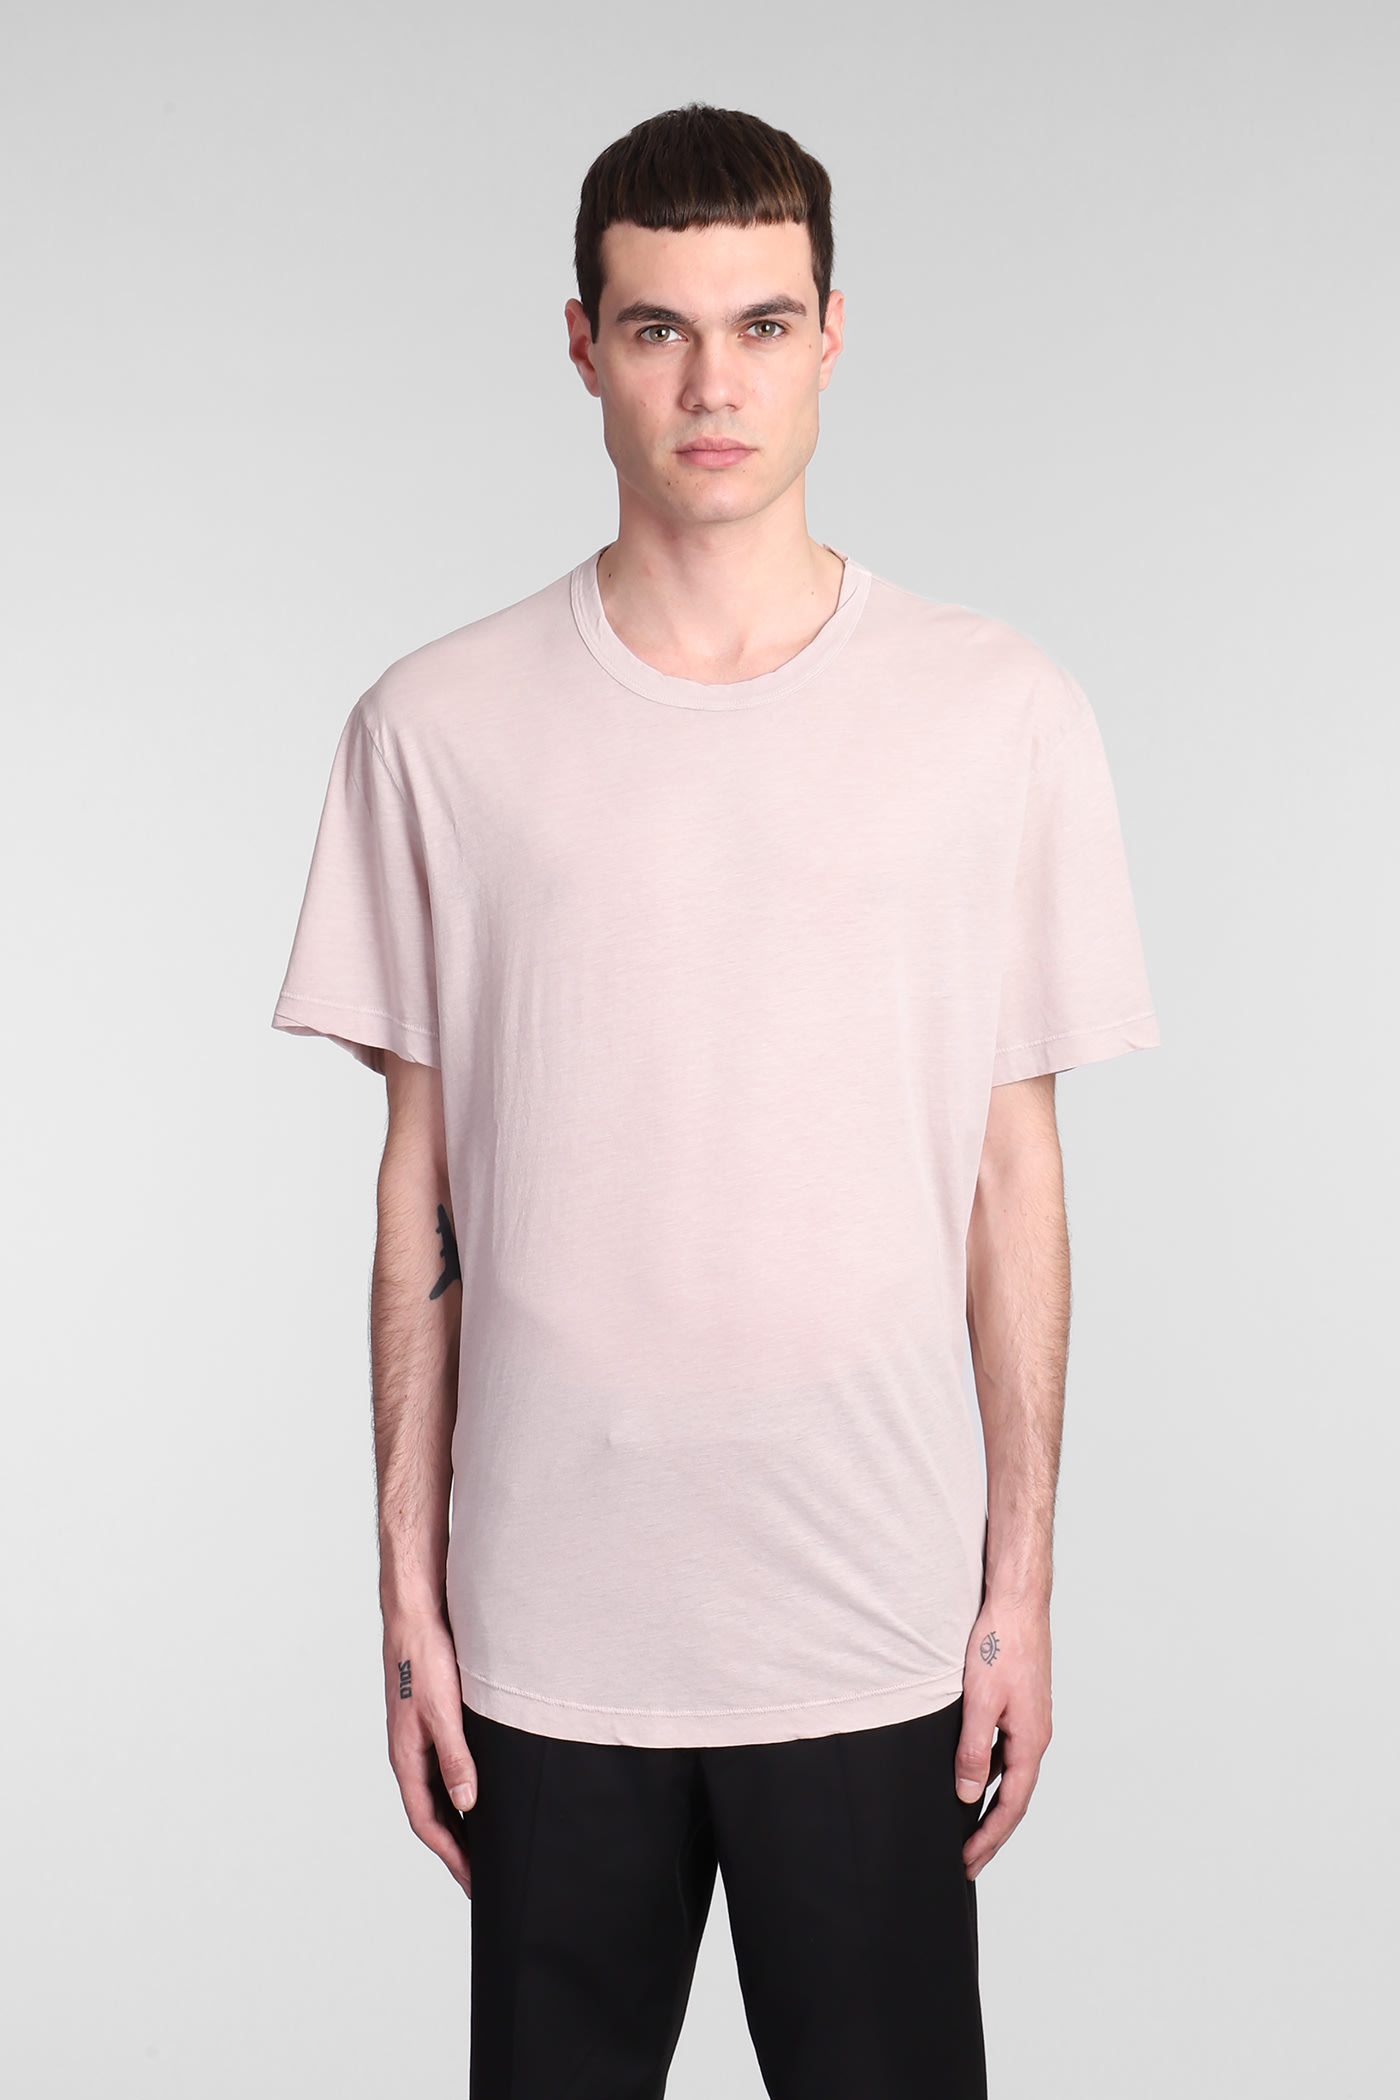 James Perse T-shirt In Rose-pink Cotton